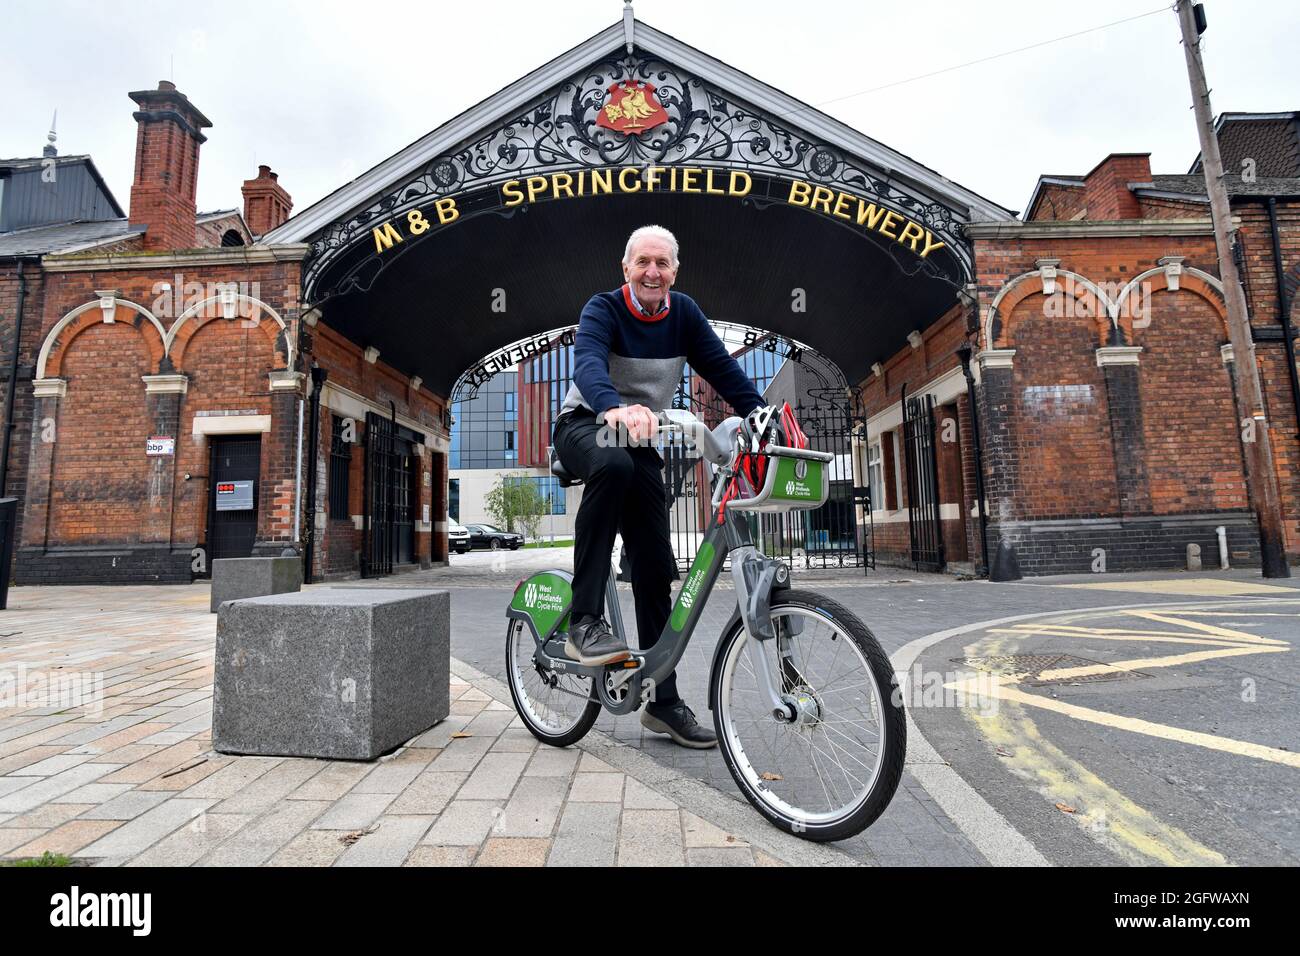 British cycling legend Hugh Porter aged 81 riding a West Midlands Cycle Hire bike in his home town of Wolverhampton. Hugh was four time World Pursuit Stock Photo